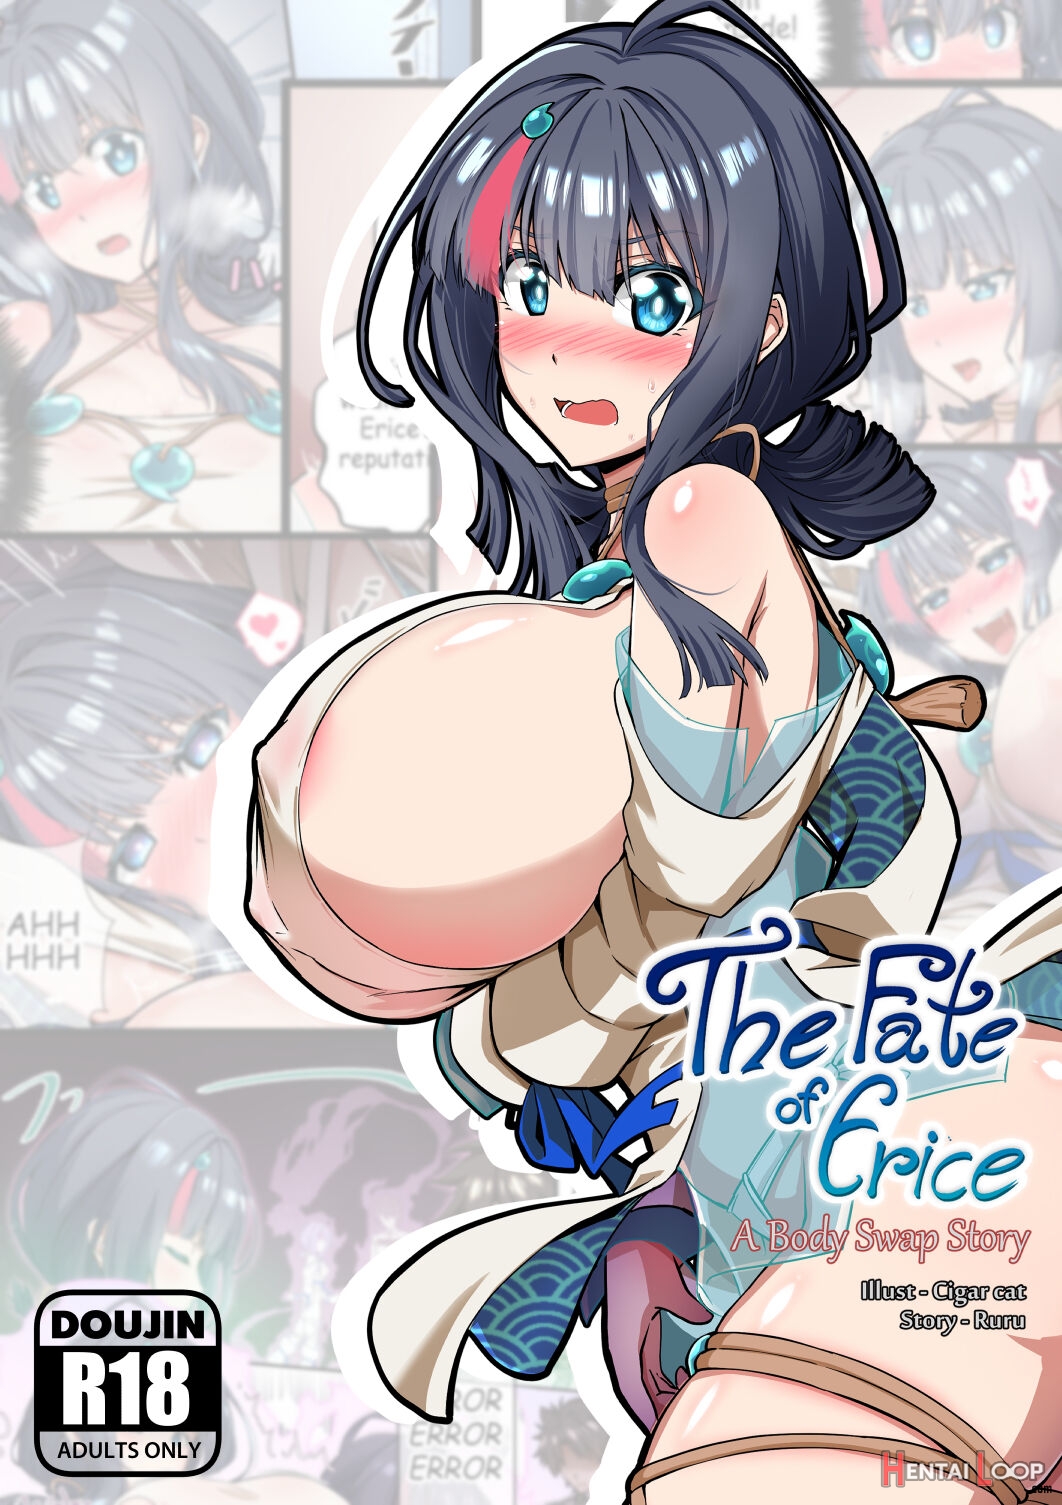 The Fate Of Erice -a Body Swap Story- (by Cigar Cat) - Hentai doujinshi for  free at HentaiLoop